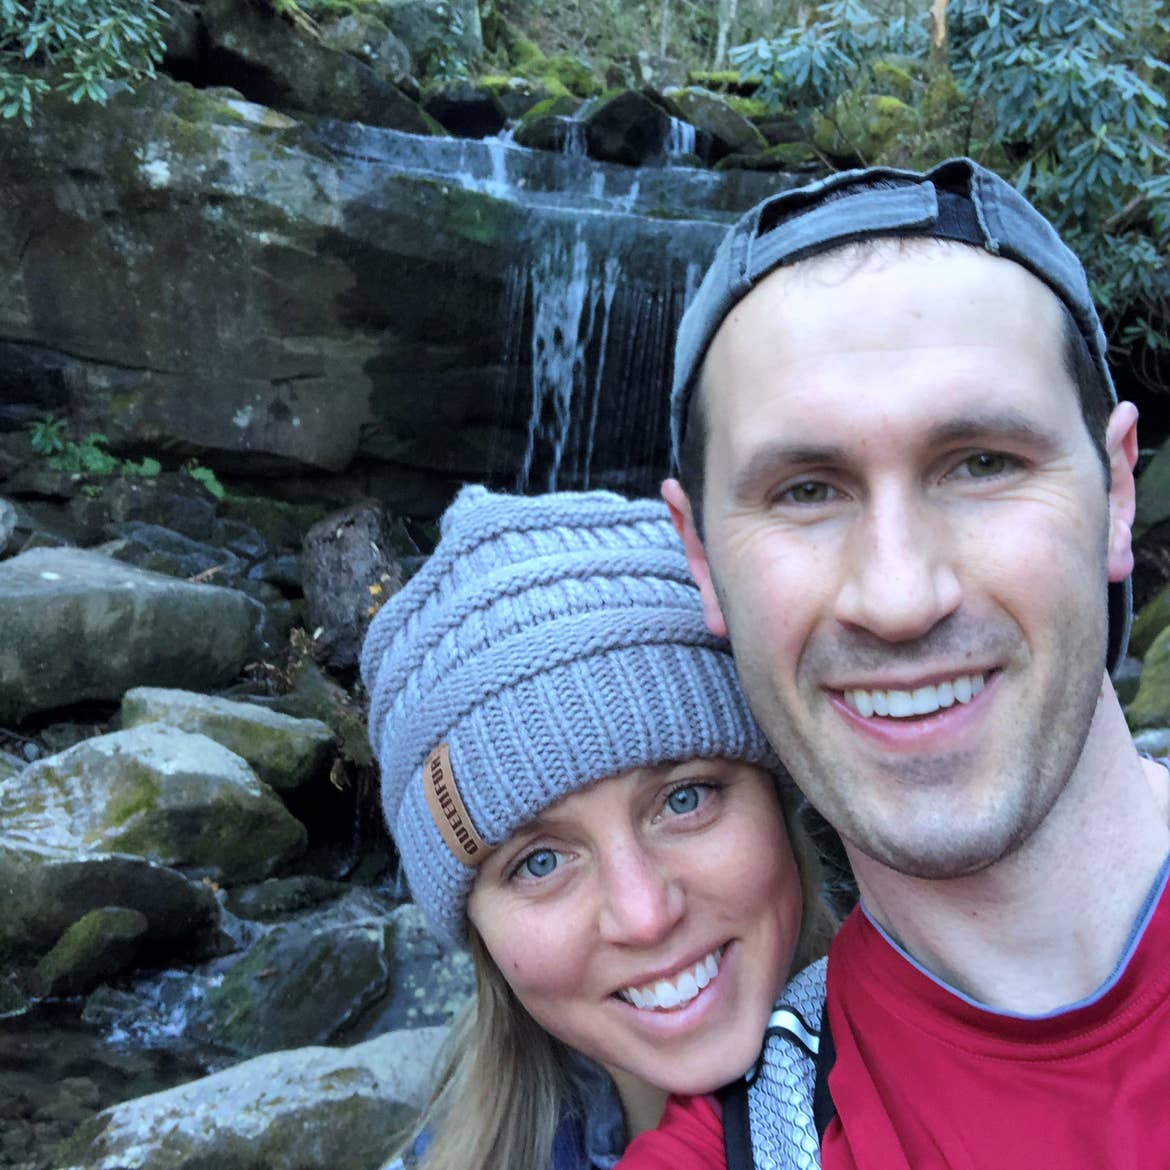 Tiffany (left) and her husband (right) pose in front of a waterfall in Gatlinburg, TN.